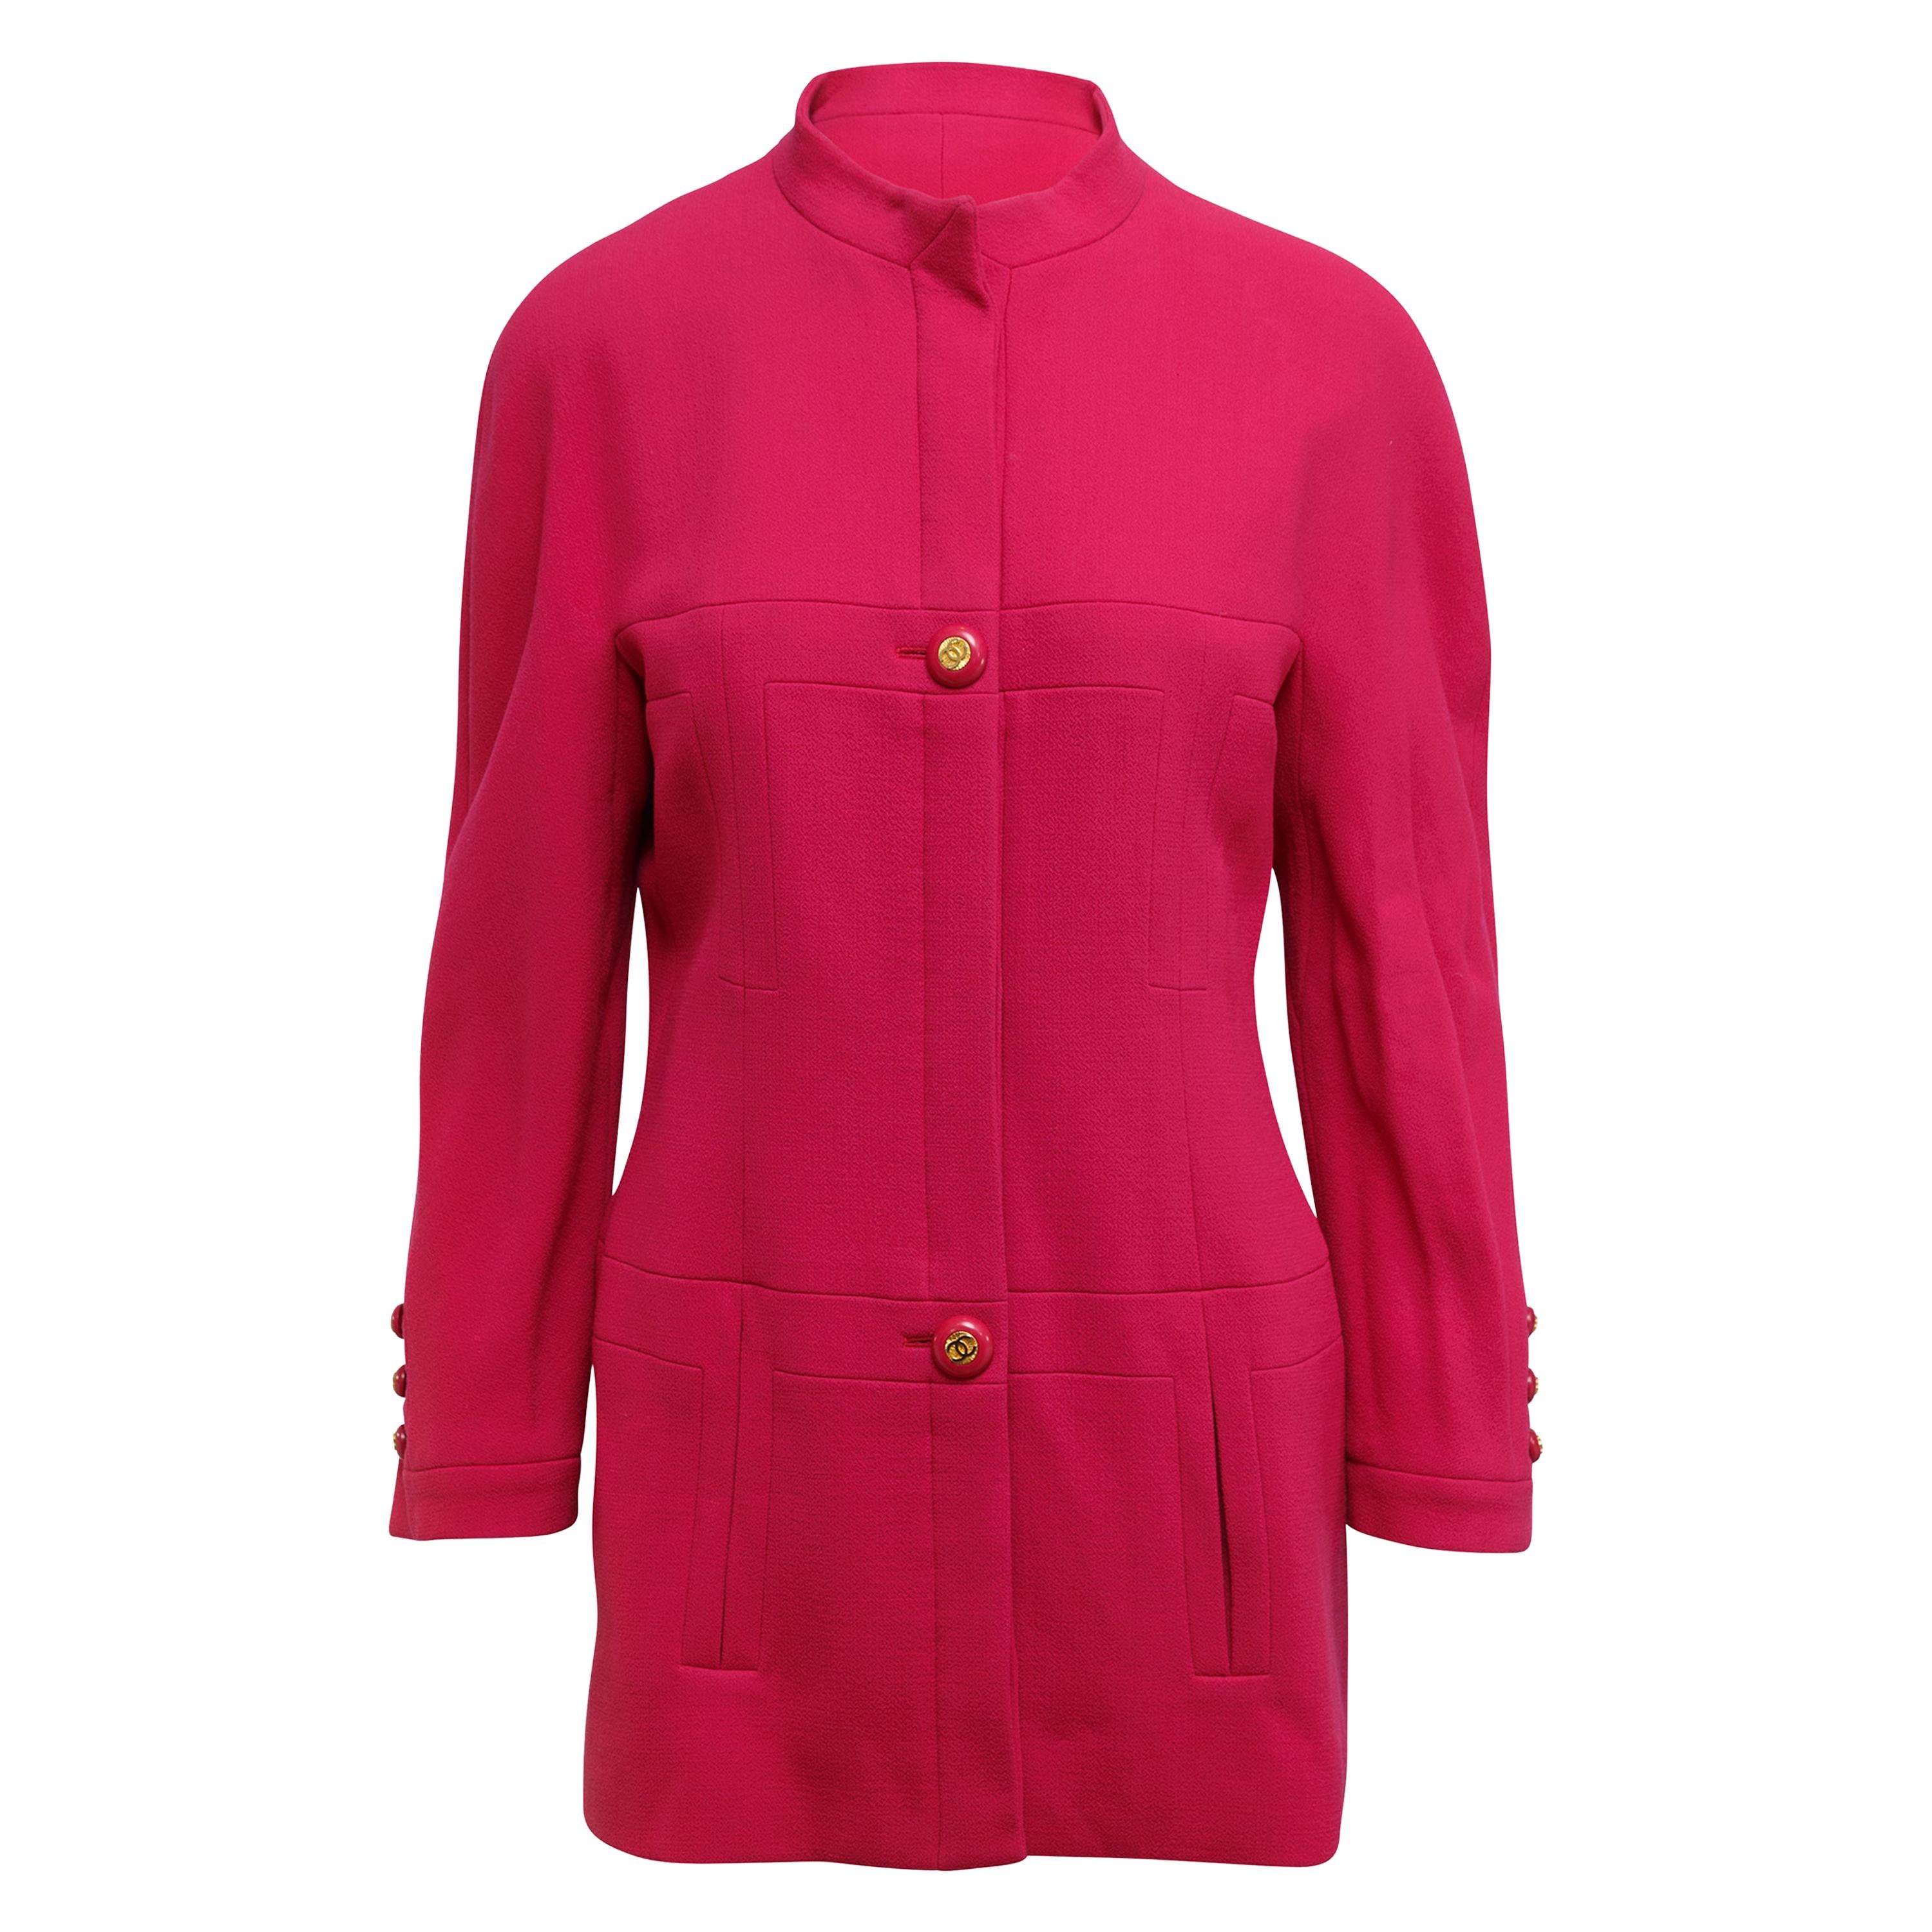 Chanel Boutique Bright Pink Coat